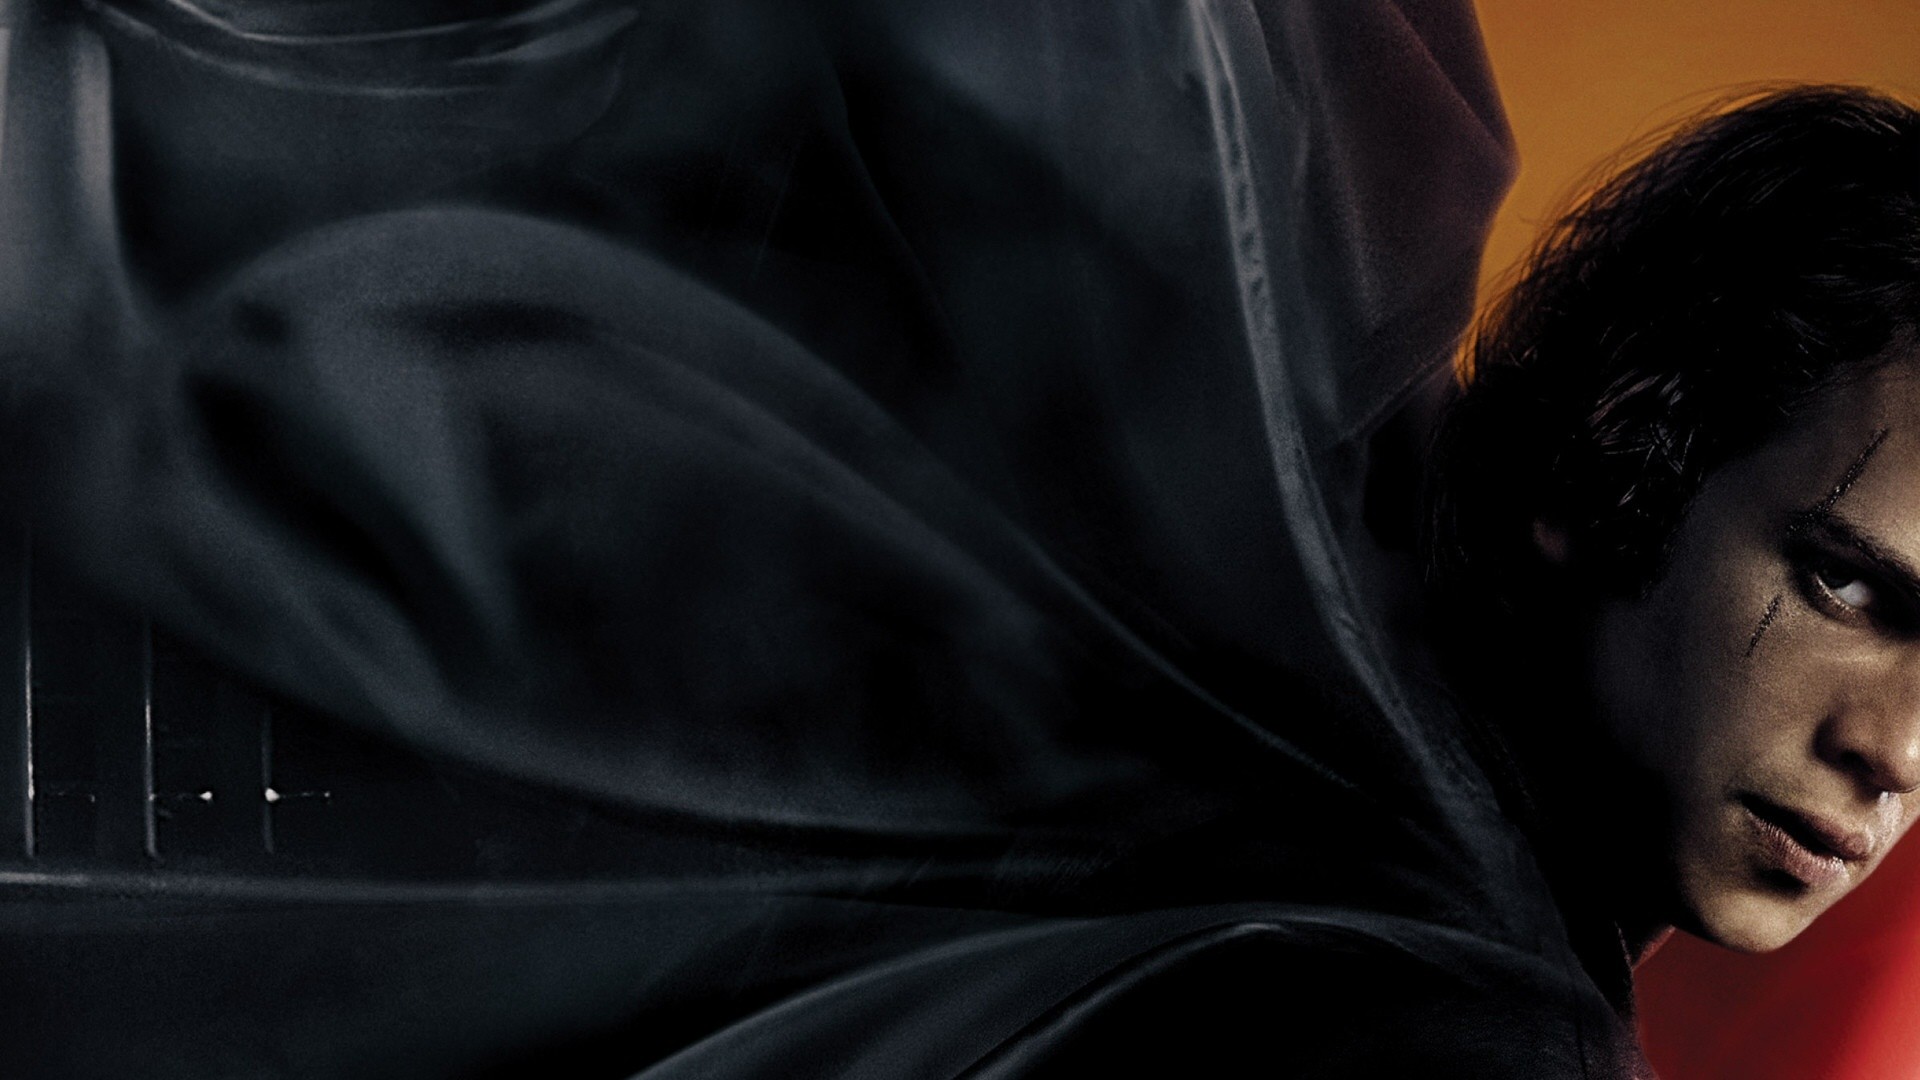 1920x1080 Star Wars: Episode III - Revenge of the Sith Wallpapers, Poster, Movie .